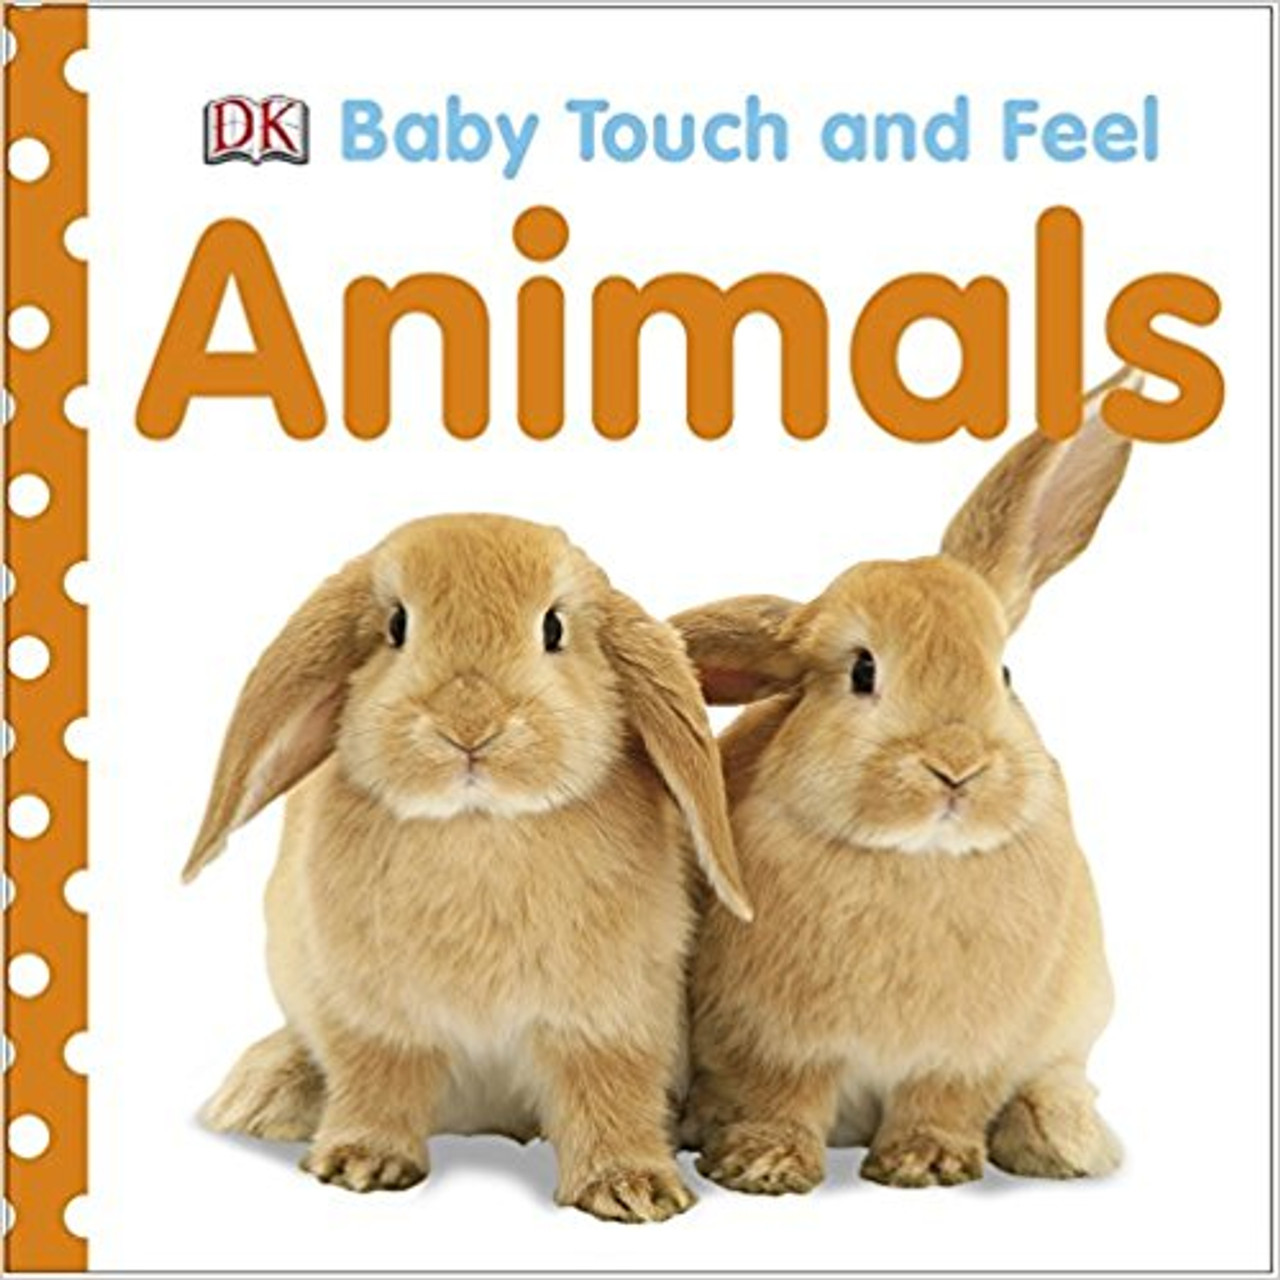 With a sparkling new look, these bestselling classics are sure to become favorites for a whole new generation of young readers. Babies and toddlers are sure to be drawn to the captivating, tactile pages and will want to touch, feel, and explore every one. Full color.